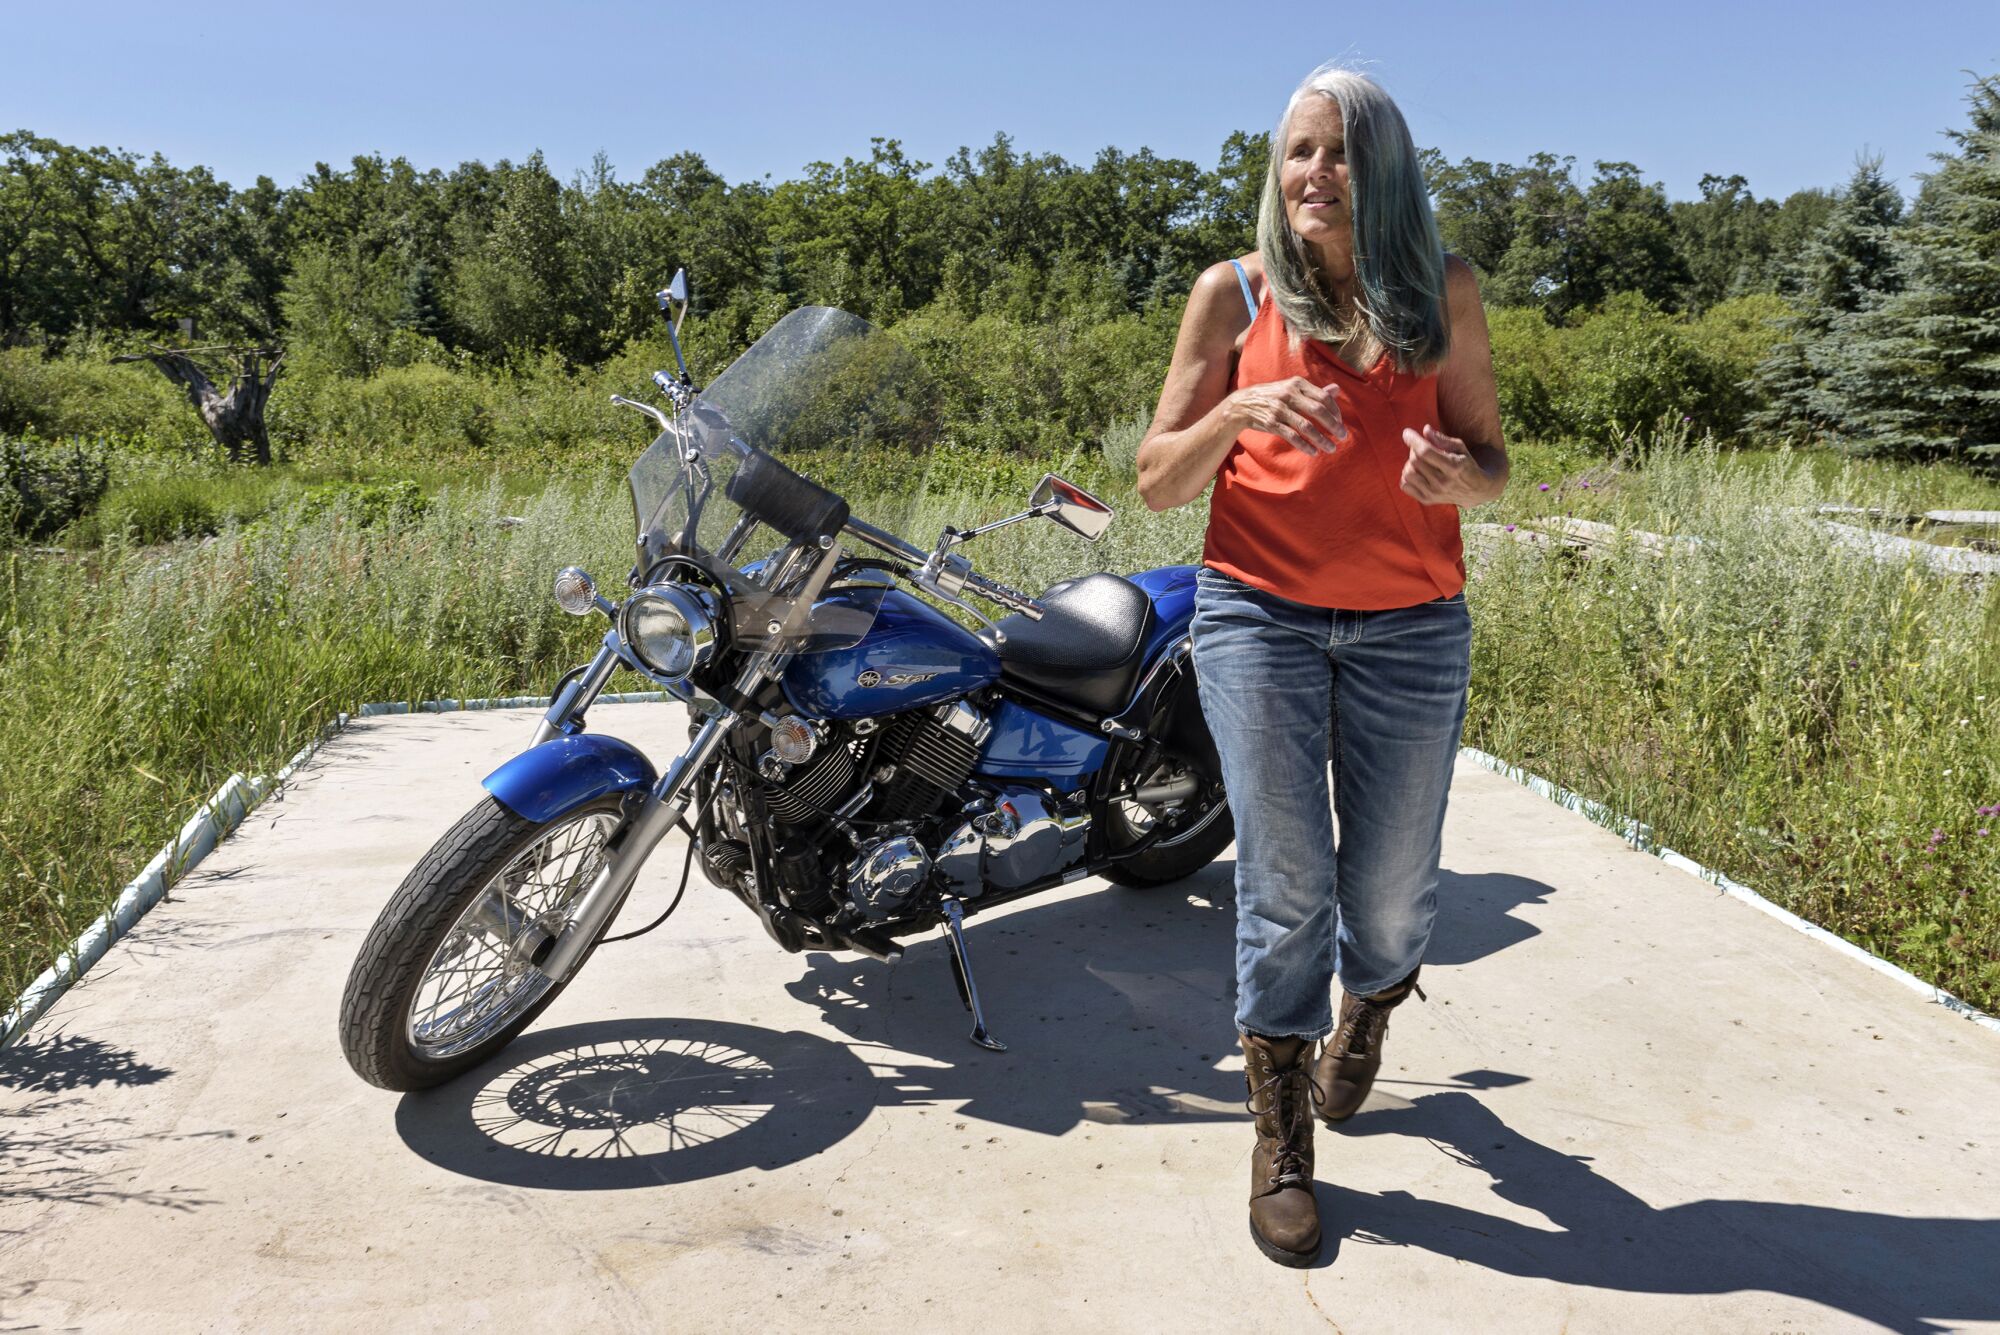 Marcy Ugstad parks her motorcycle outside the Ugstads' lakeside home.